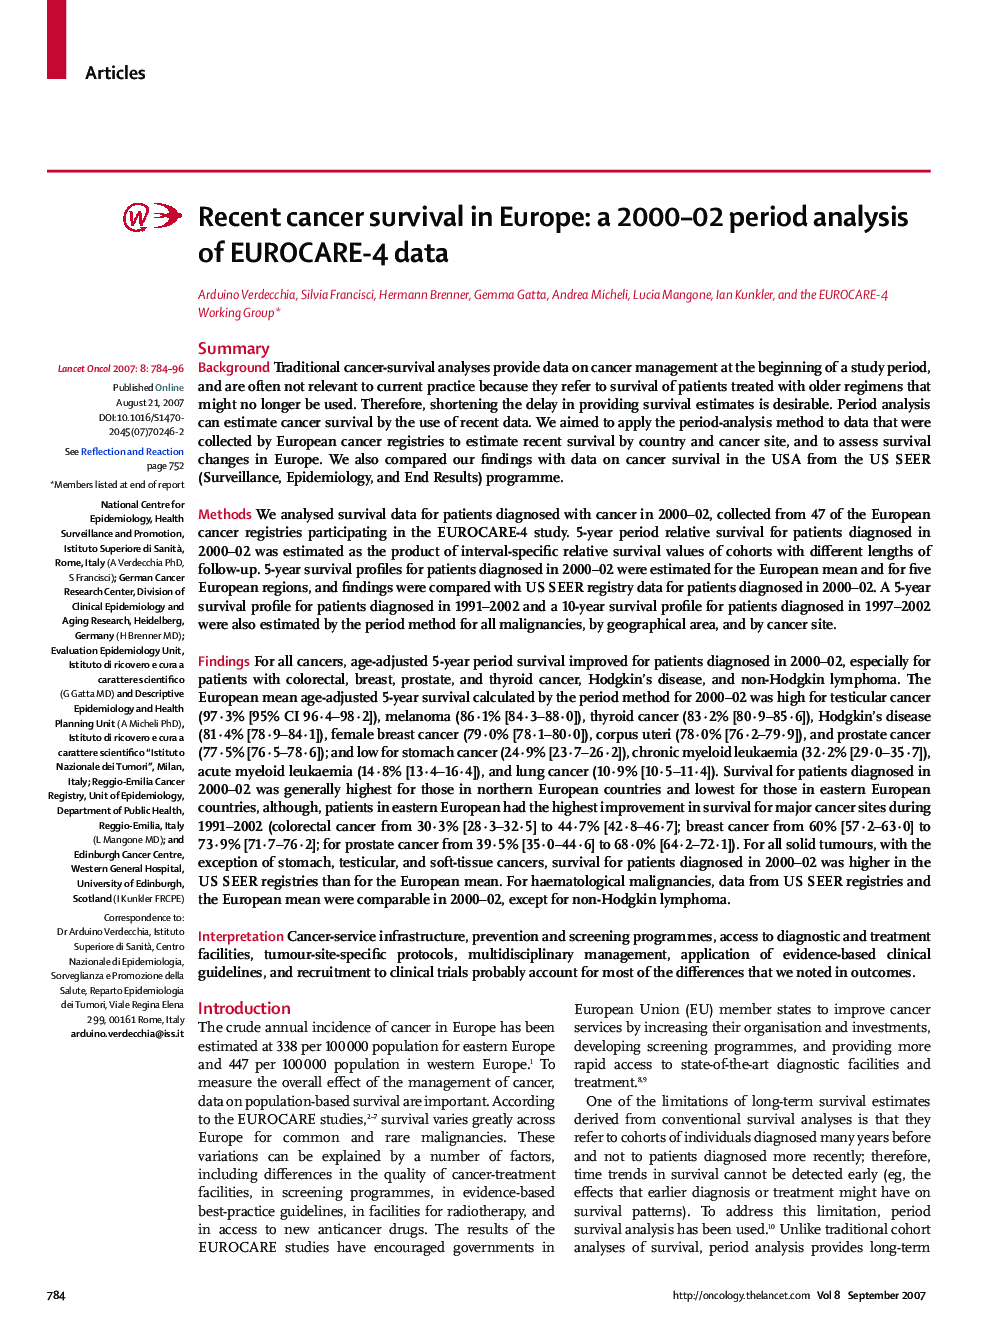 Recent cancer survival in Europe: a 2000–02 period analysis of EUROCARE-4 data